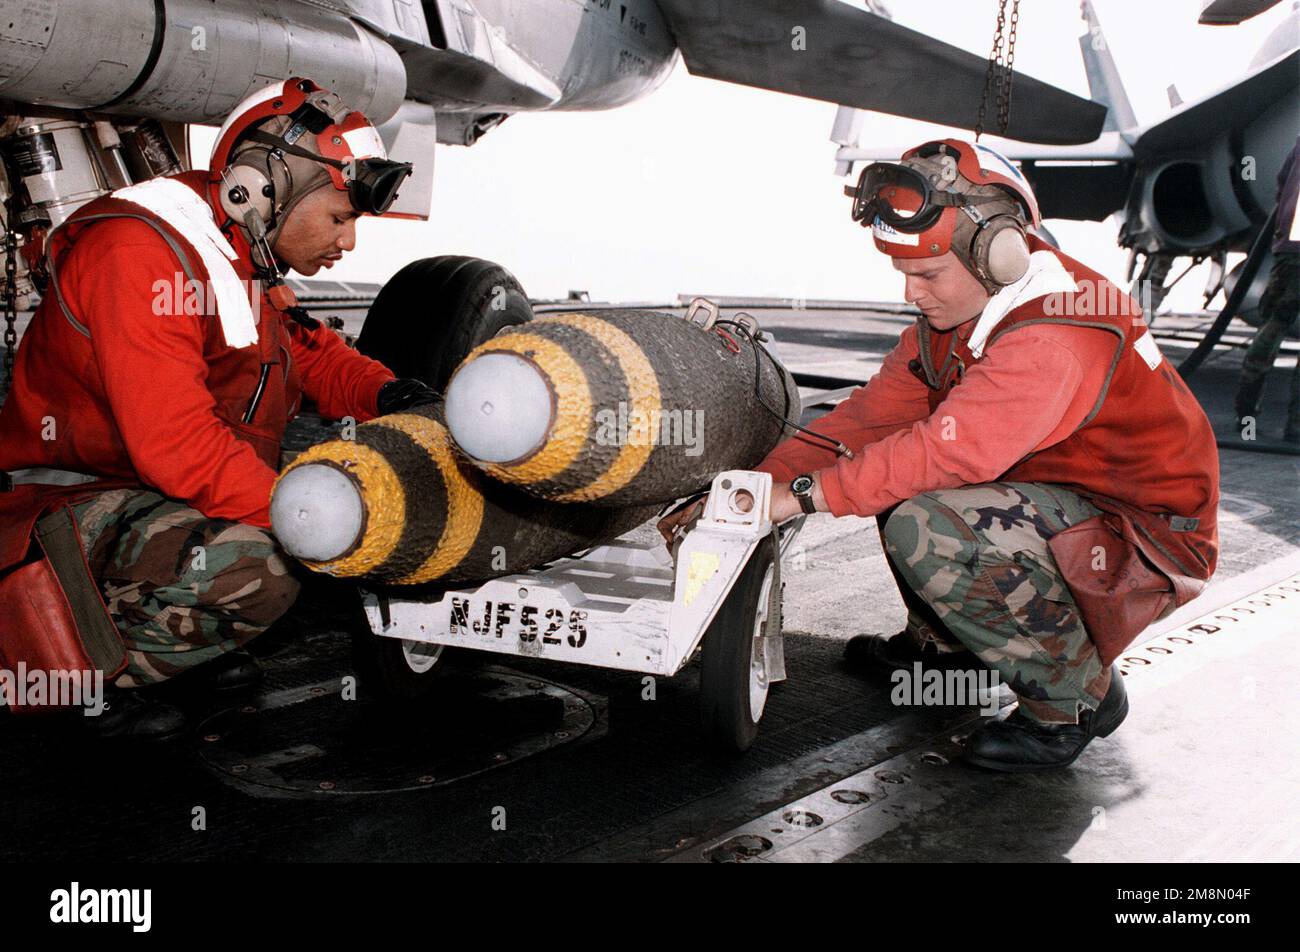 Aviation Ordnanceman 2nd Class Alvin Toney (right) and Aviation Ordnanceman 3rd Class Steve Chilton load a MK-83 1000-pound bomb onto an F/A-18C Hornet aboard the aircraft carrier USS GEORGE WASHINGTON (CVN 73). George Washington deployed to the Persian Gulf in support of Operation Southern Watch. Subject Operation/Series: SOUTHERN WATCH Base: USS George Washington (CVN 73) Country: At Sea Stock Photo